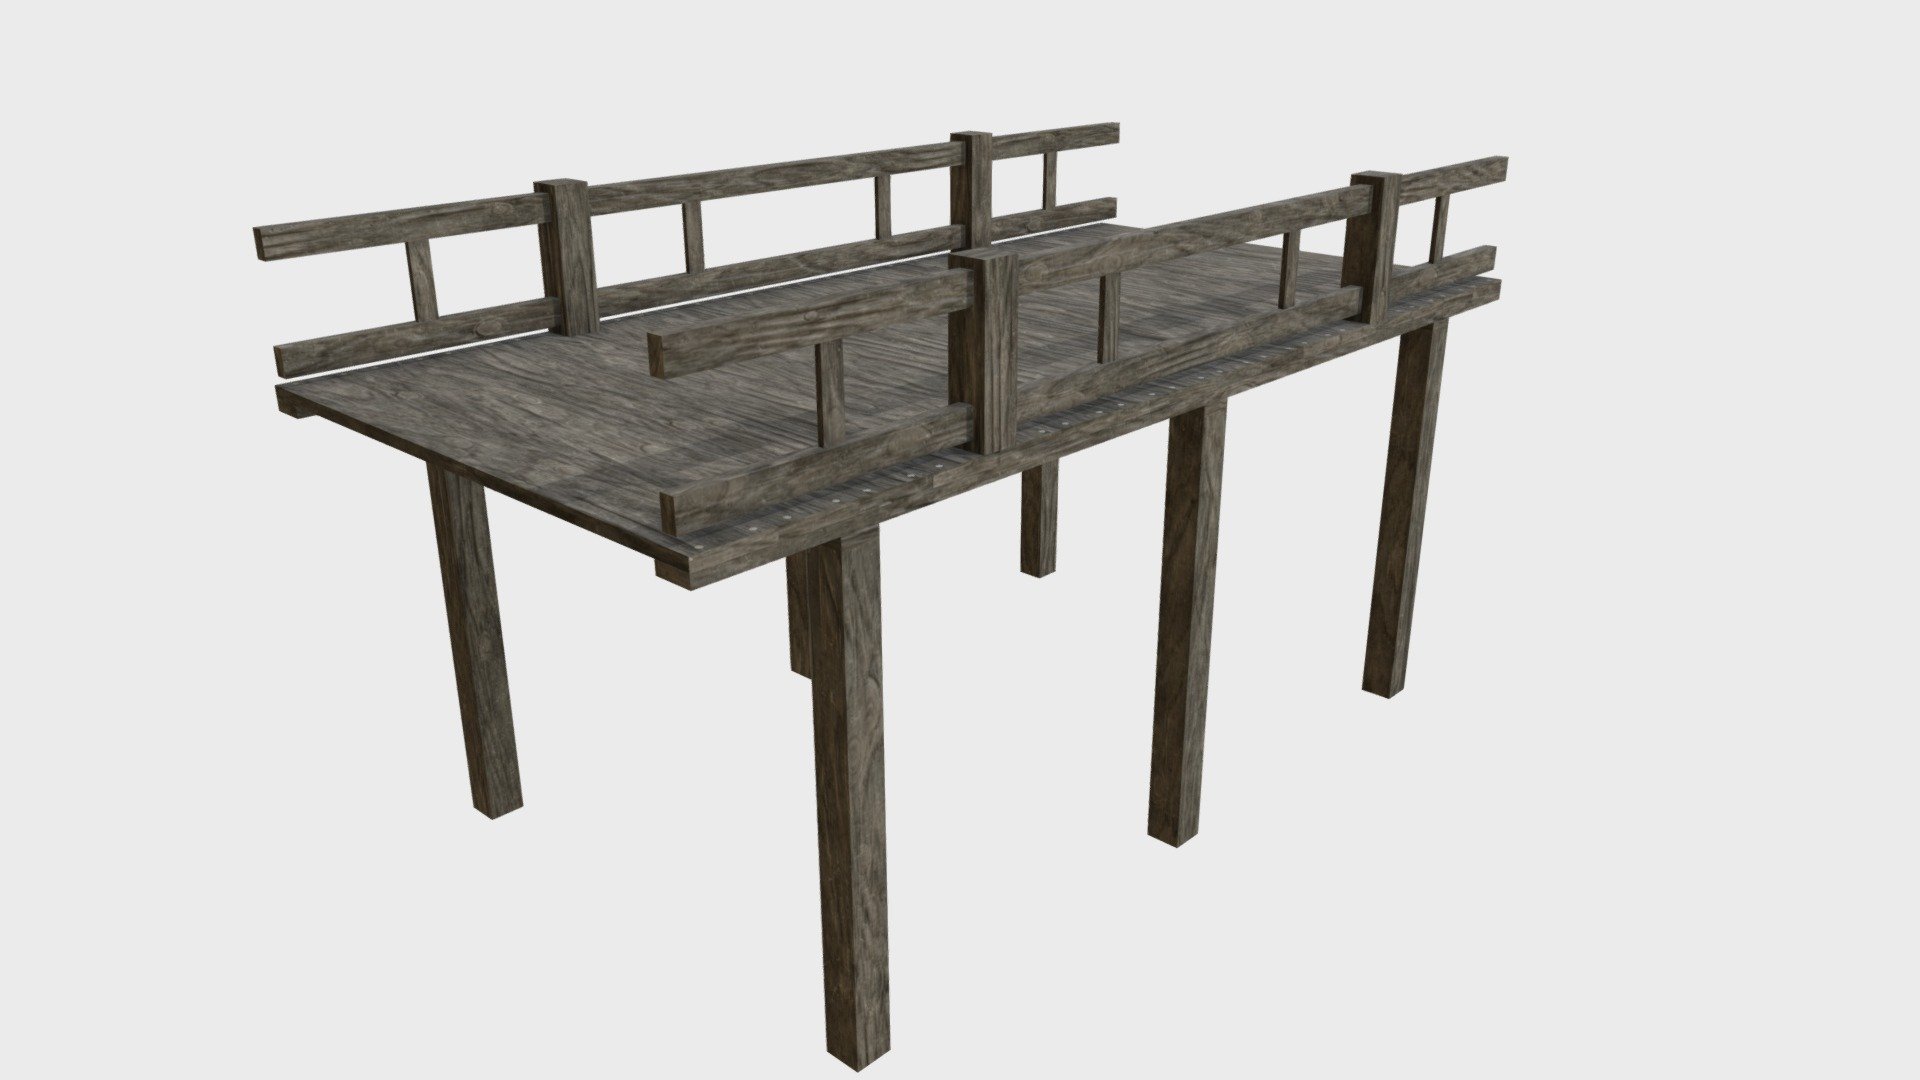 Wooden pier with railing